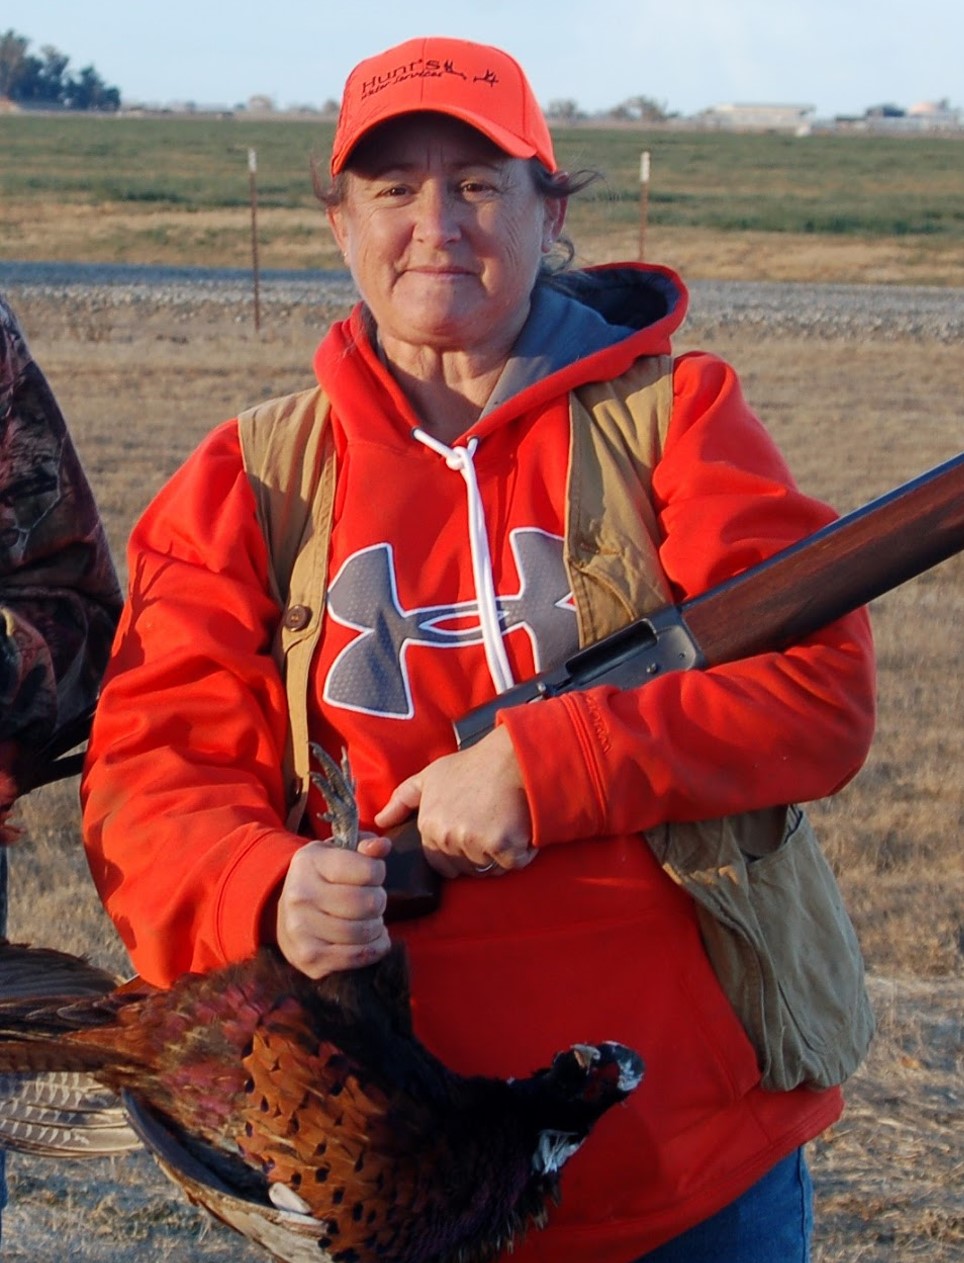 A woman in red baseball cap and hoodie, wearing a khaki vest, holds a rifle and a pheasant which she has shot. Behind her the land is flat and the grass is brown. It appears to be windy.